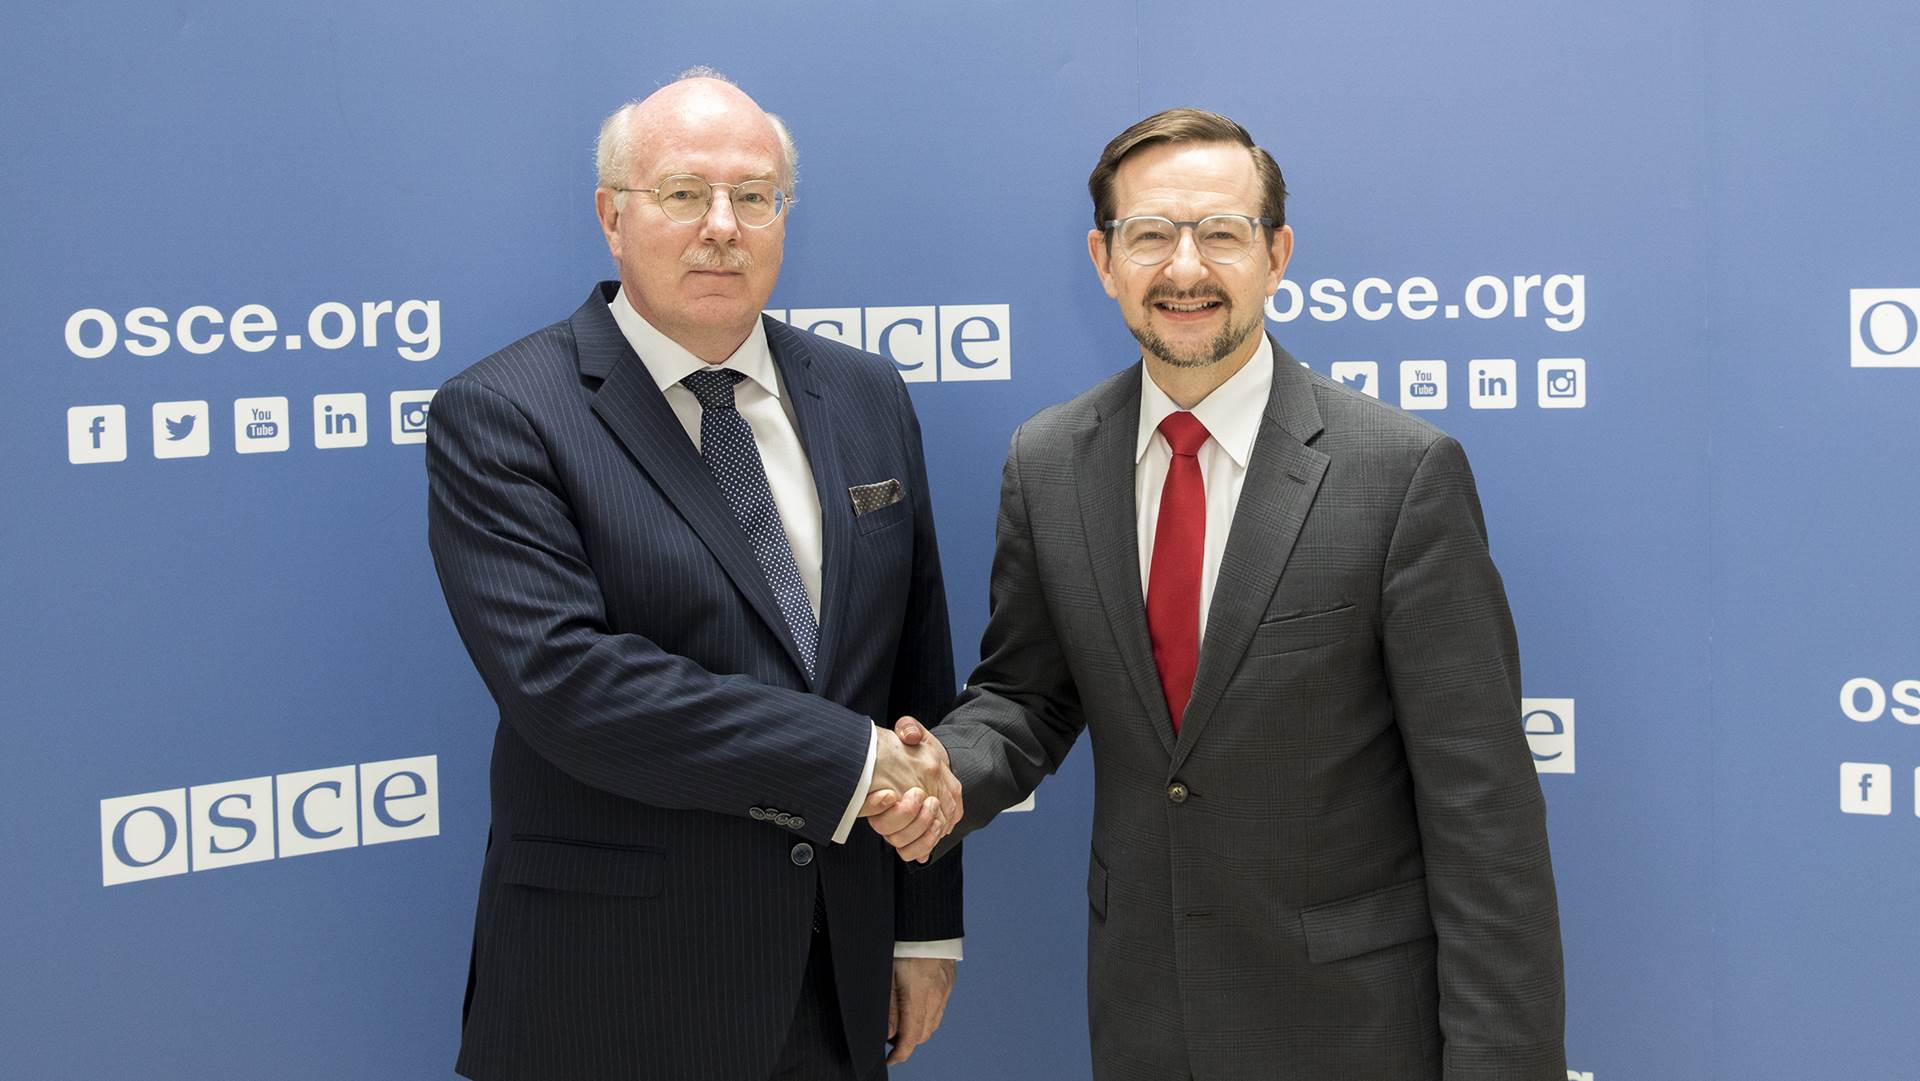 Presentation of Letter of Credence to the Organization for Security and Co-operation in Europe (OSCE) - mynd